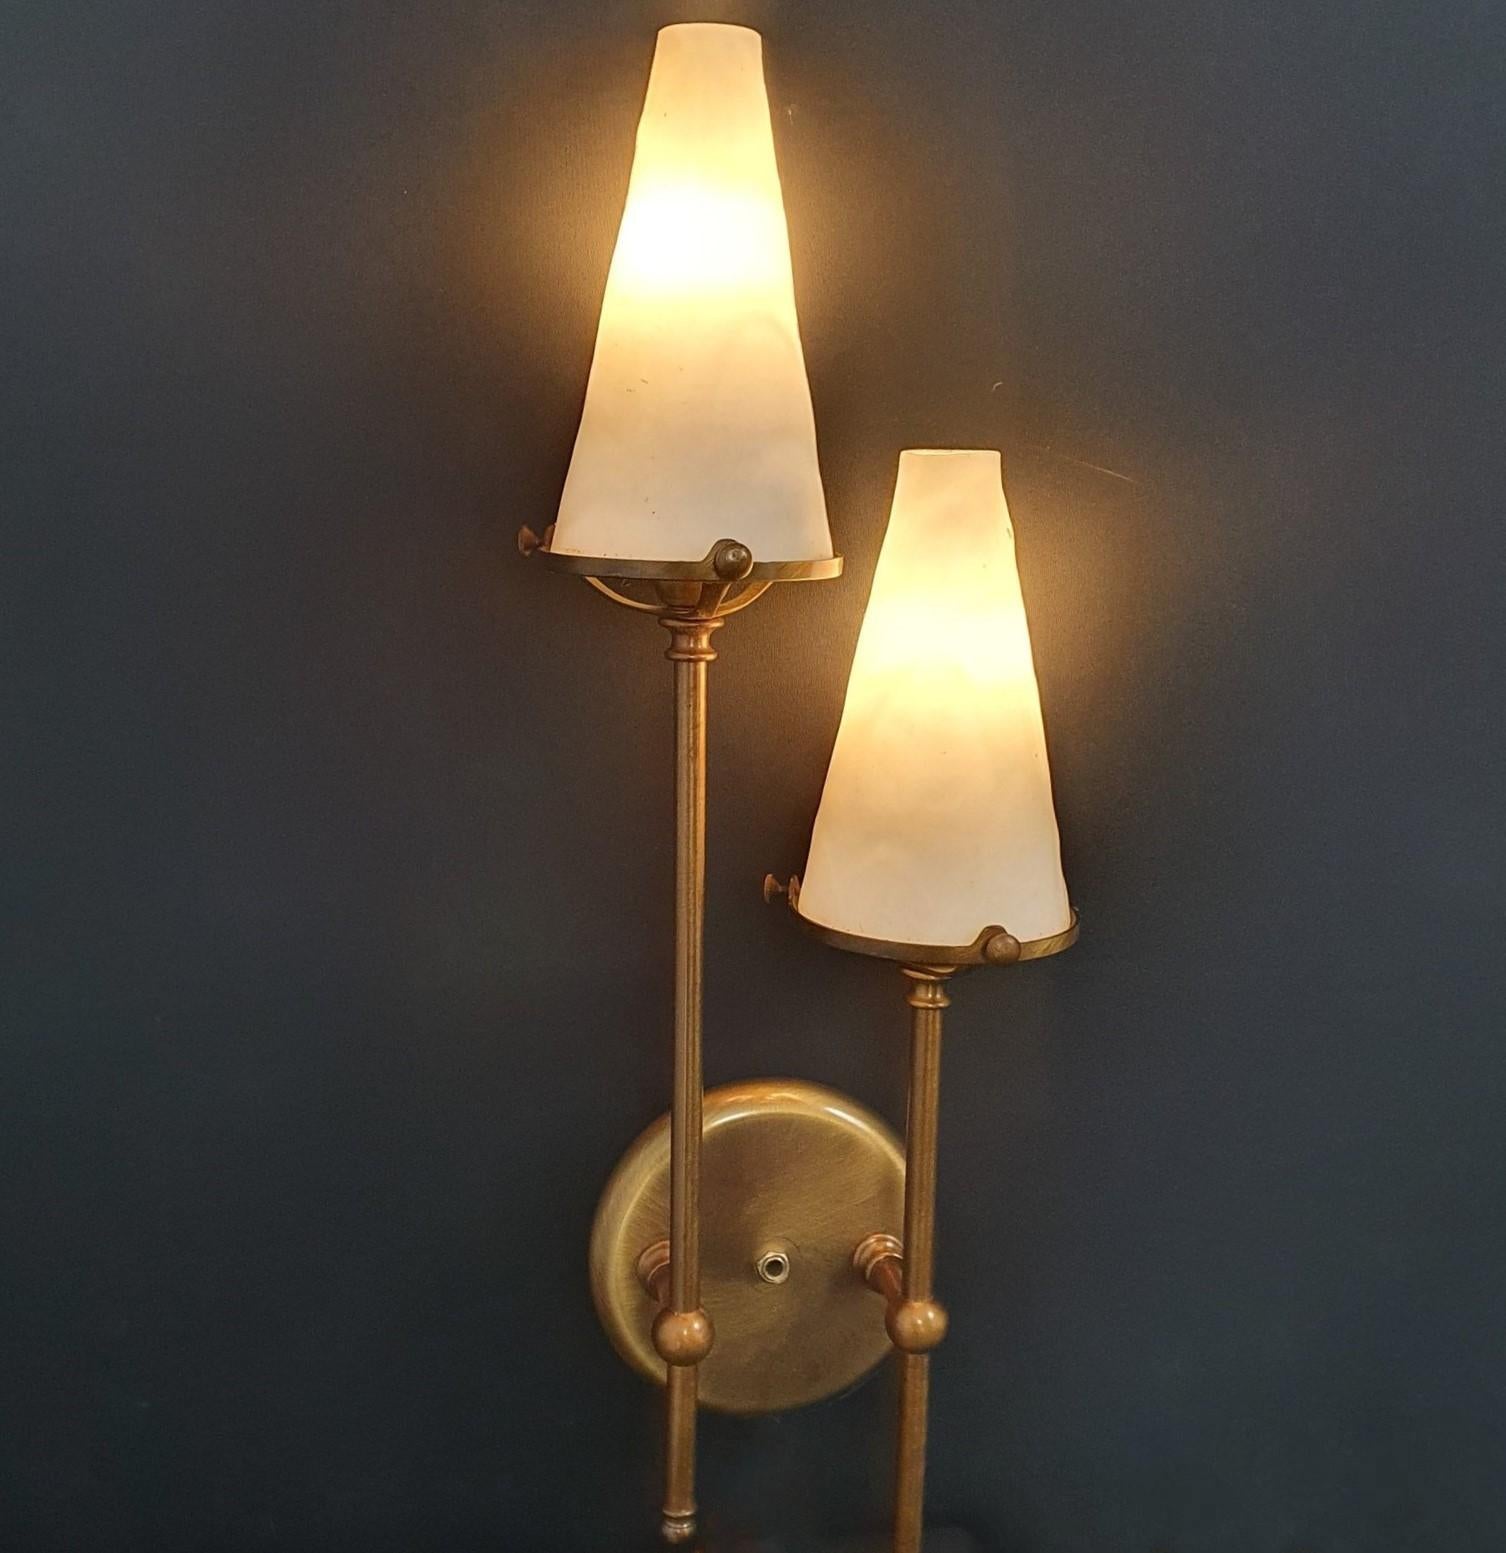 A tall Art Deco two-arm sconce wall light in style of Maison Jansen, France, 1955-1959. Very elegant design made of bronzed brass with two conical glass shades. It takes 2 Edison E14 candelabra screw bulbs. LED bulbs can also be used. In very good